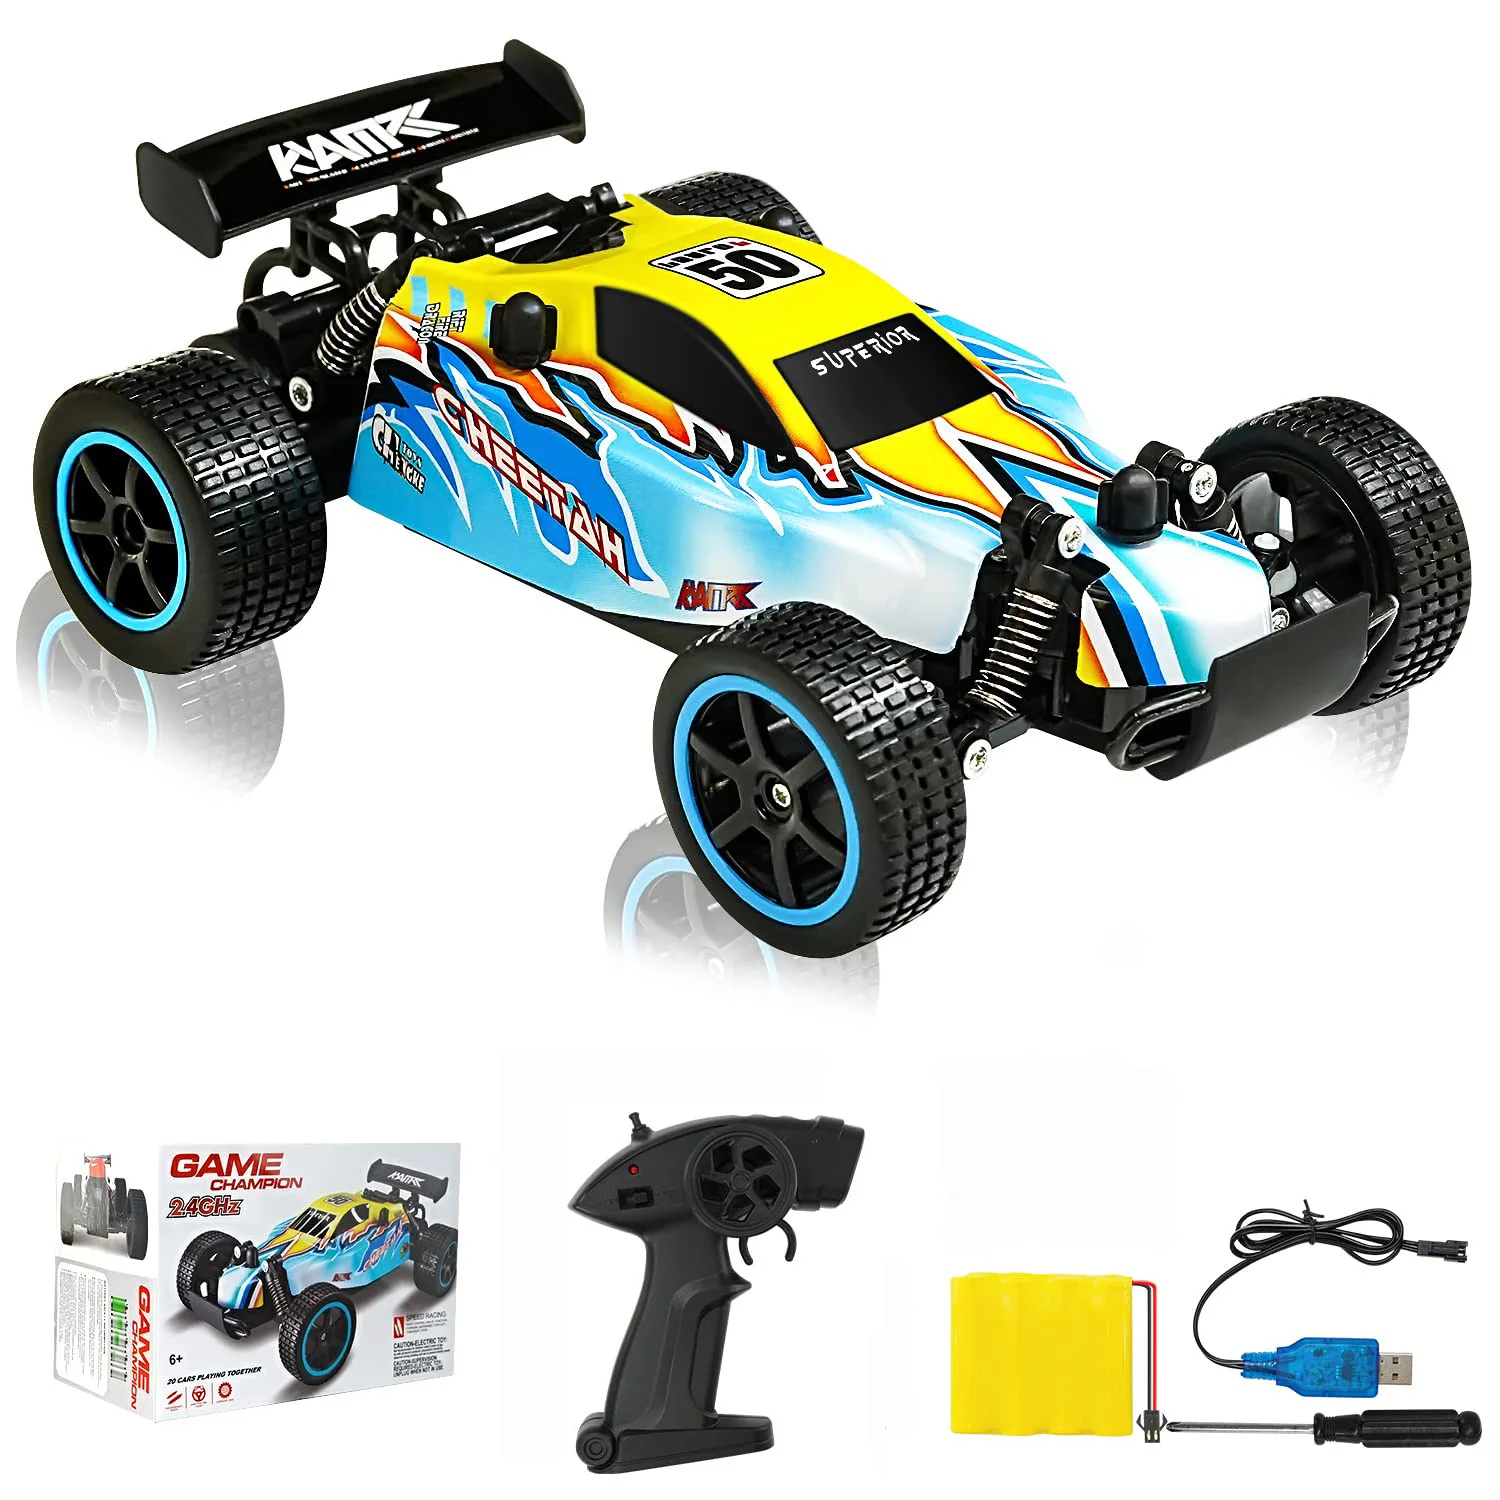 

1:20 Mini High Speed RC Car 20KM/h Remote Control Toy 2WD RC Buggy Cars Drift RC Racing Car Gift For Kids Boy Girl Birthday gift